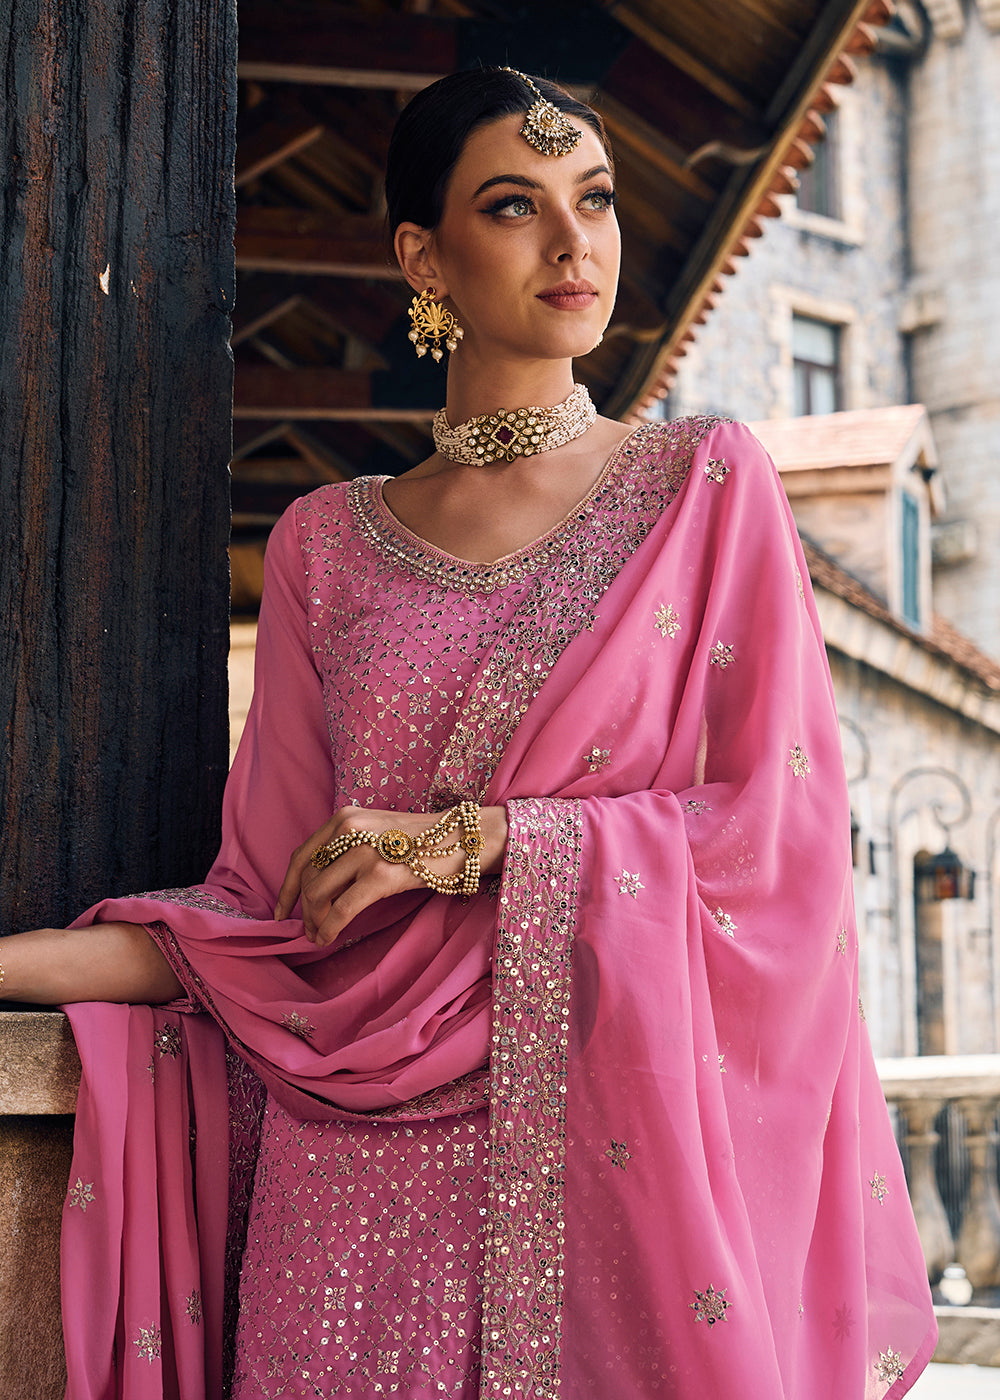 Buy Now Punjabi Style Pink Embroidered Designer Palazzo Suit Online in USA, UK, Canada, Germany, Australia & Worldwide at Empress Clothing. 